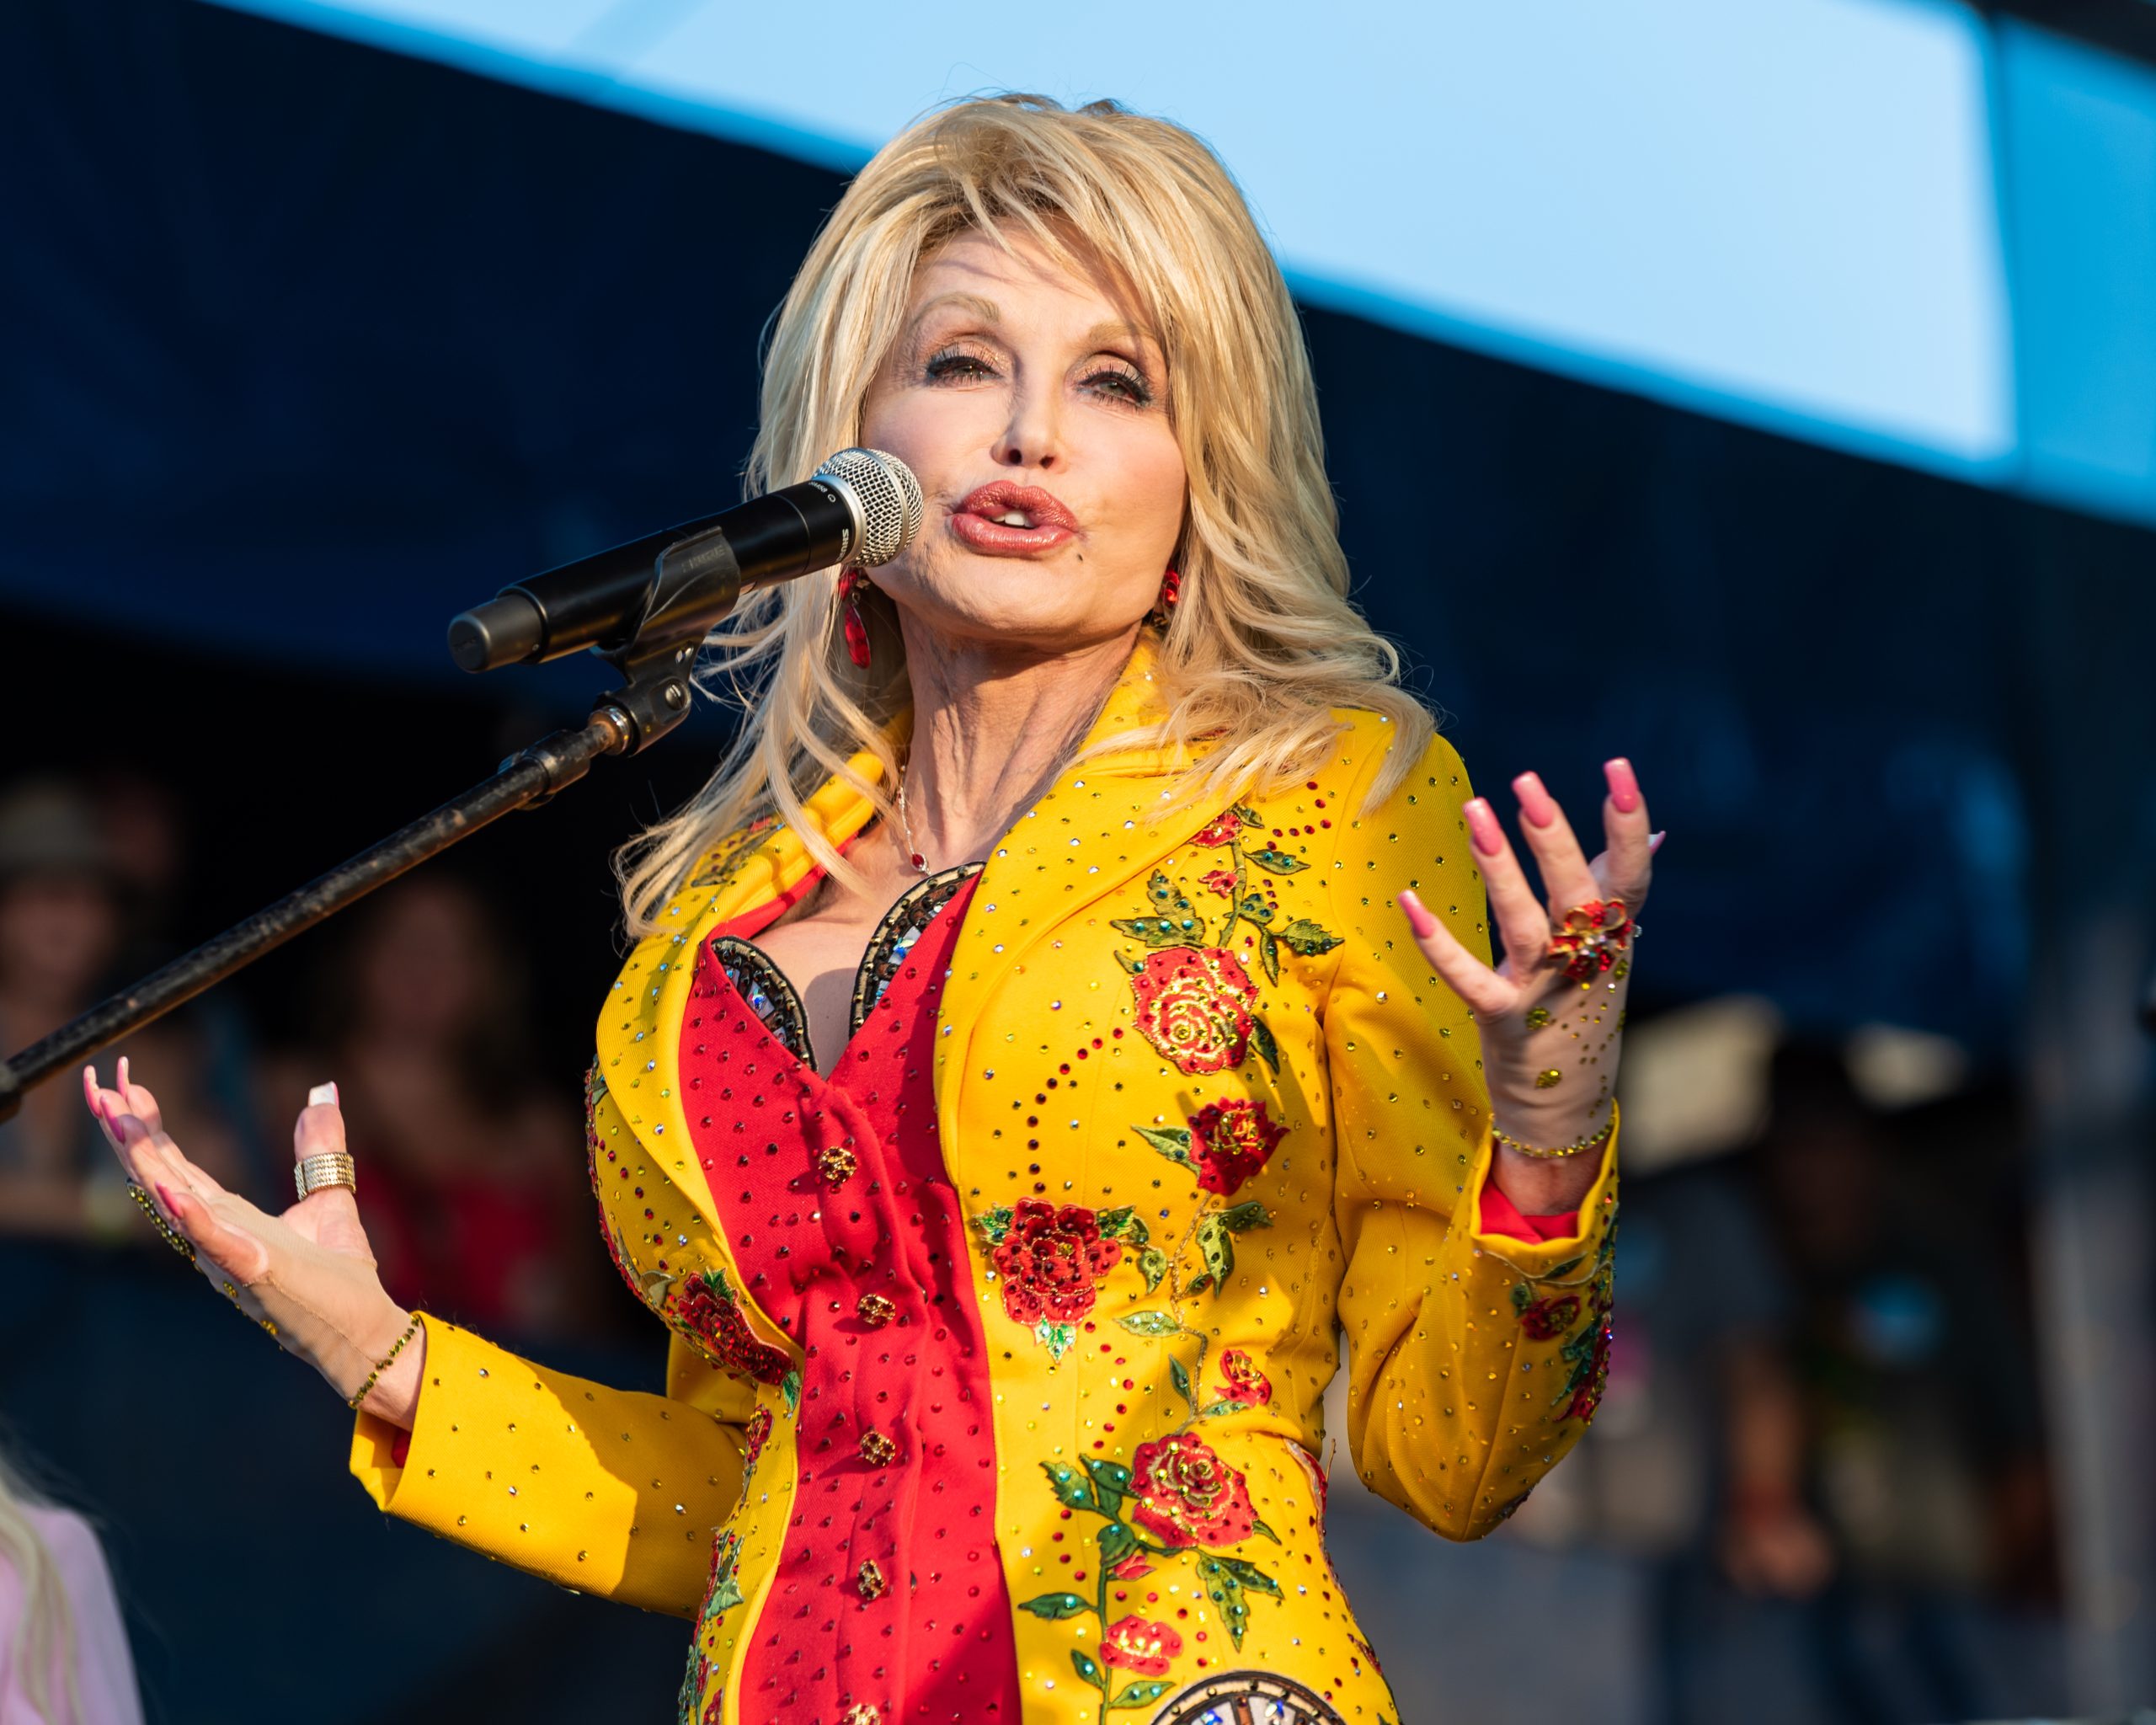 Dolly Parton Shares What Her Husband Thinks of Hit Track Jolene image pic